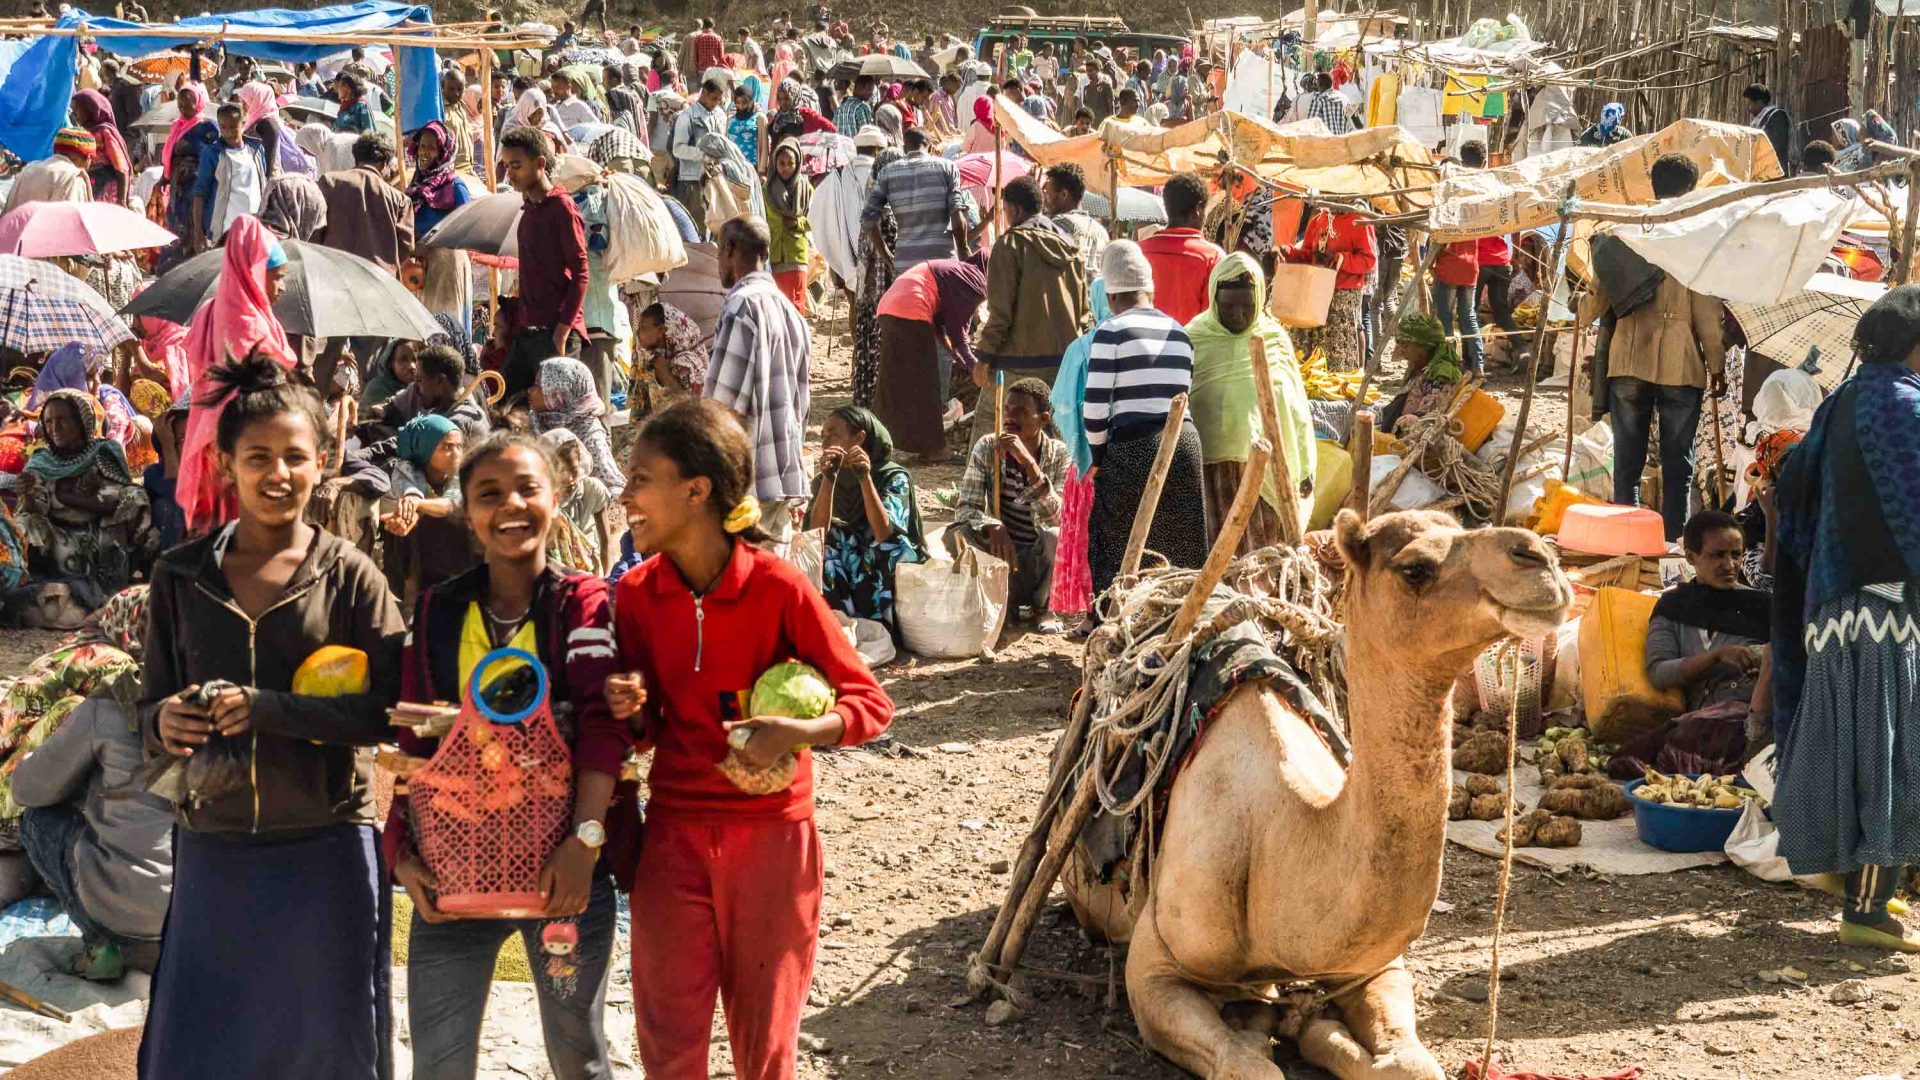 Crowds of people and a seated camel in a marketplace.